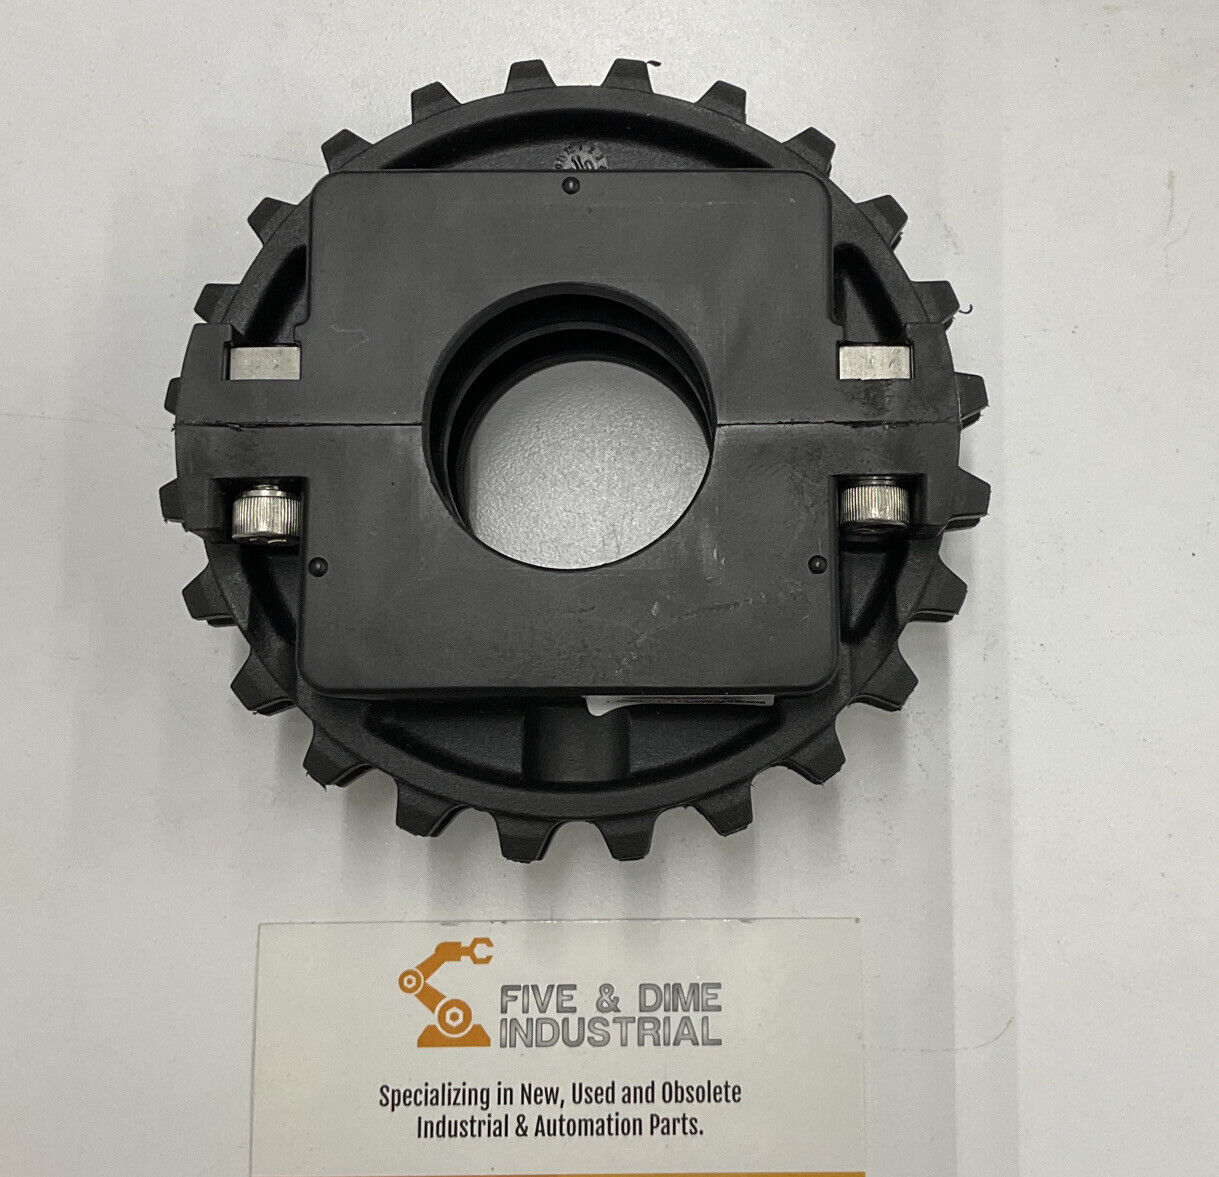 Rexnord NS1500-24T 1-1/2IN_I_PA New Round Split Sprocket 10028505 (BK141)